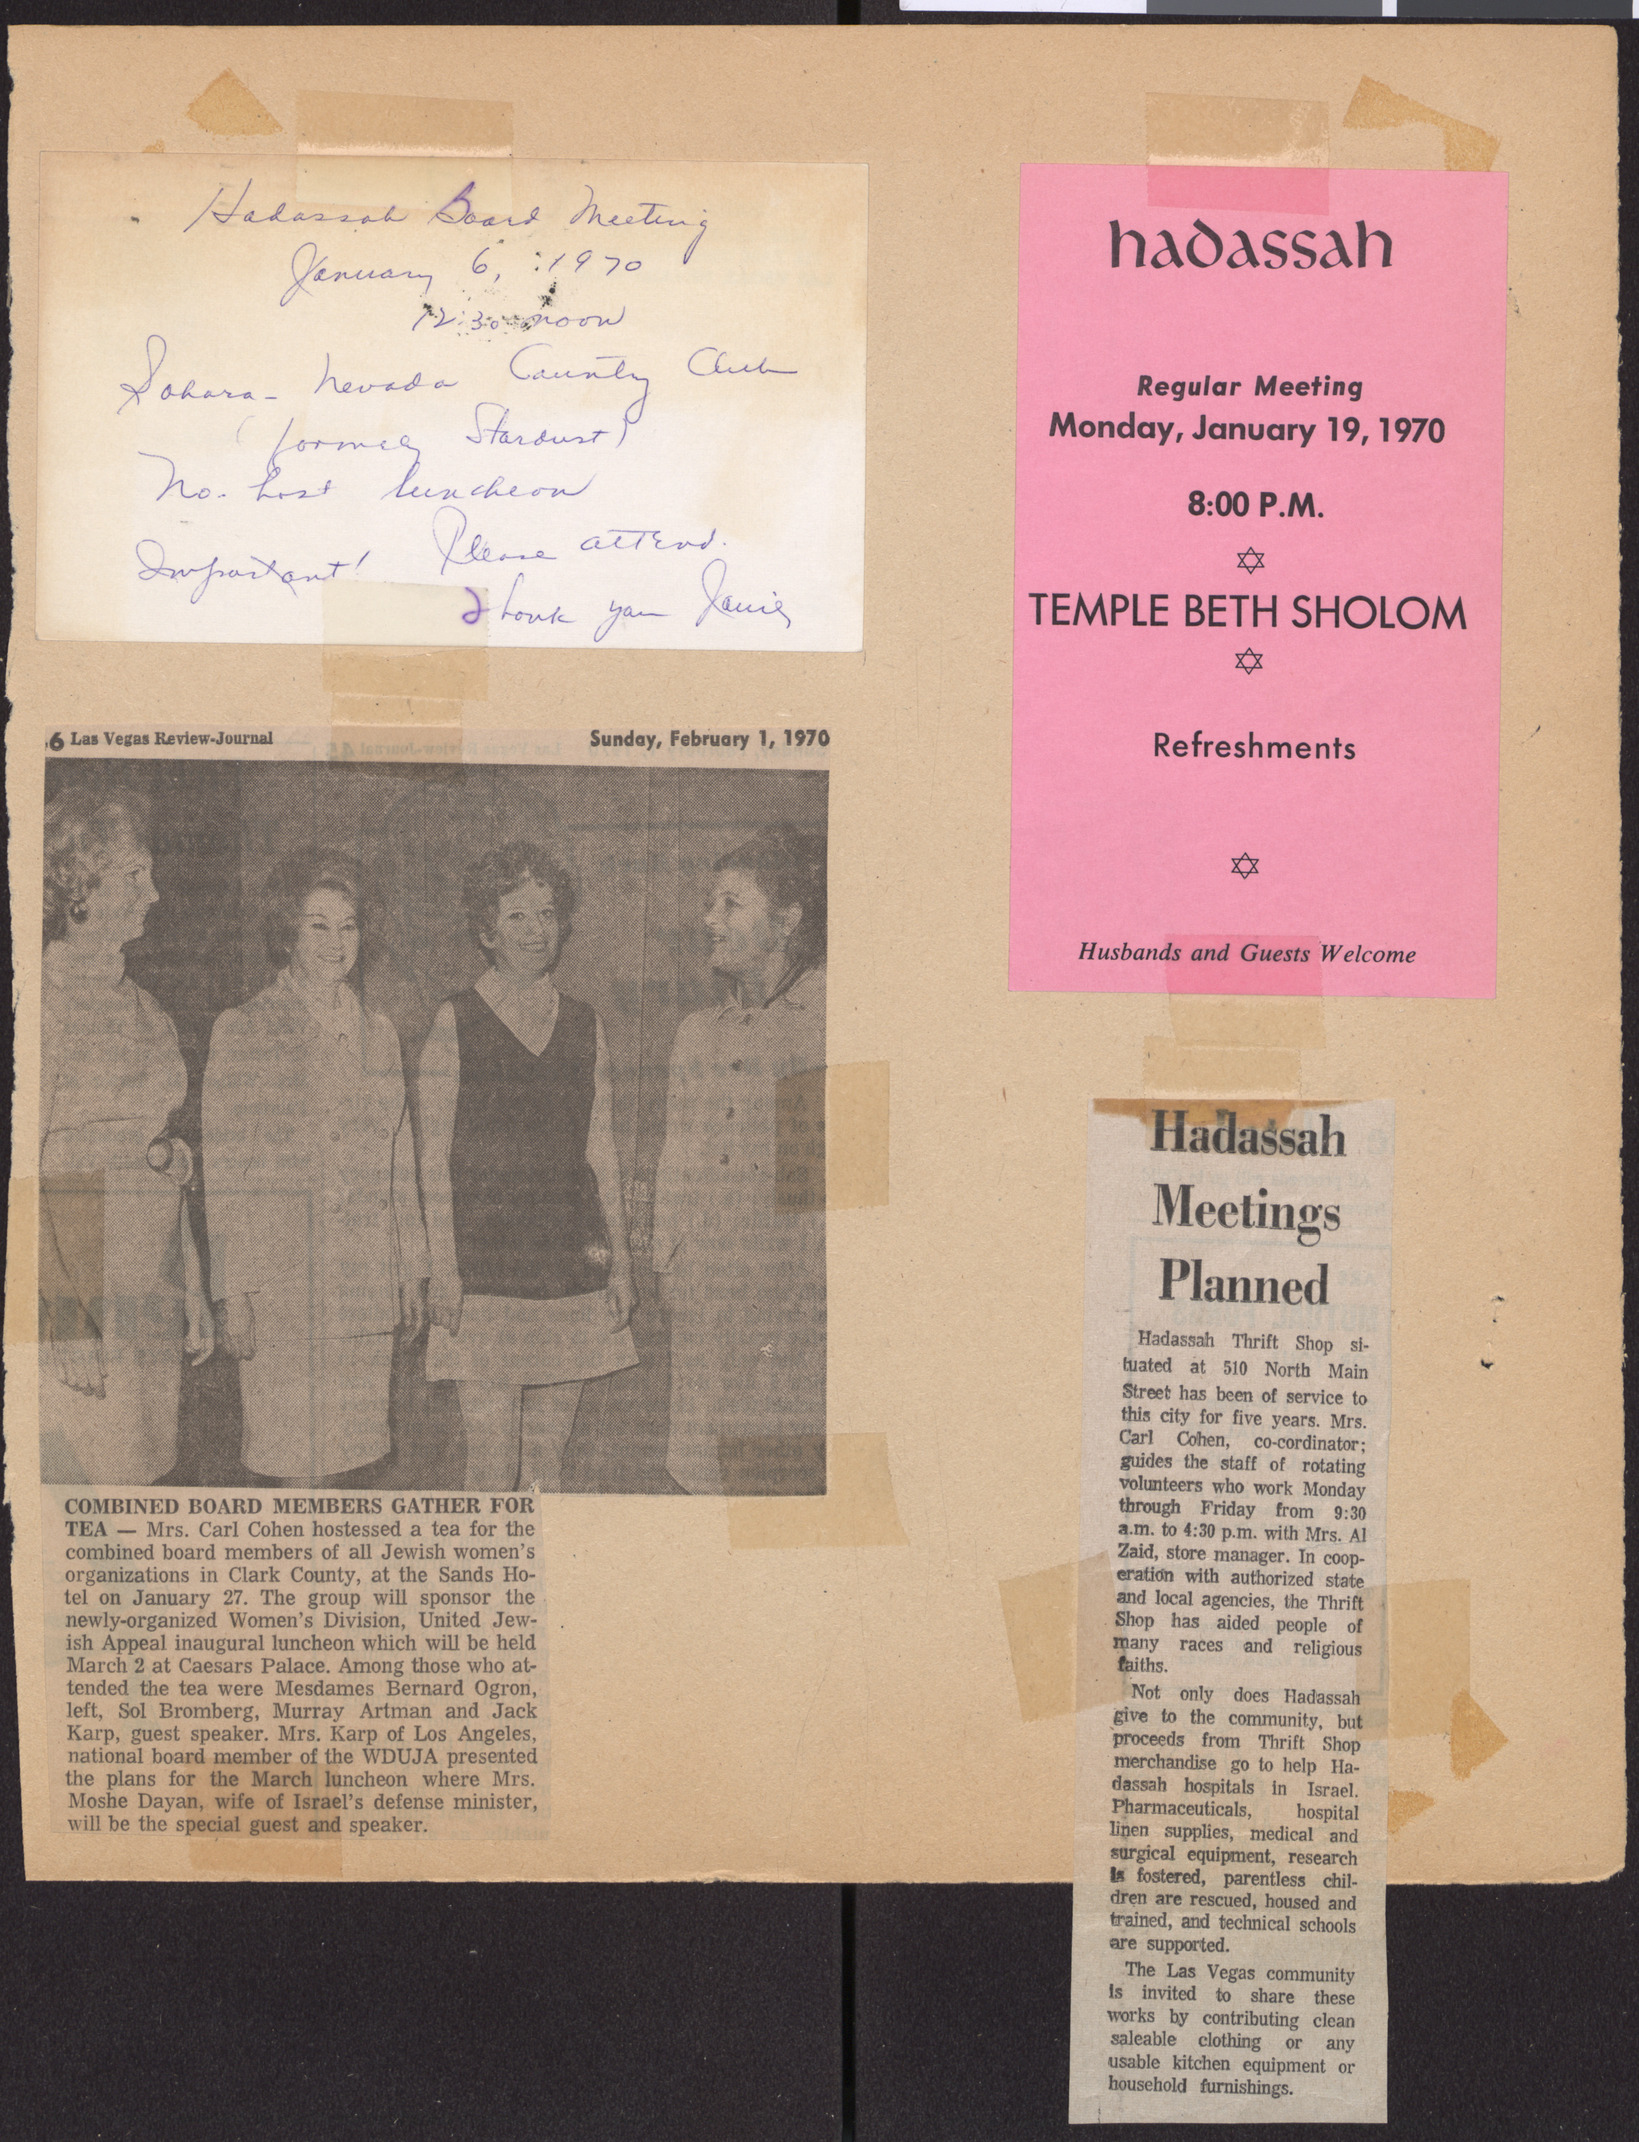 Invitation card, newsletter, flier and newspaper clipping for Hadassah events, January 1970